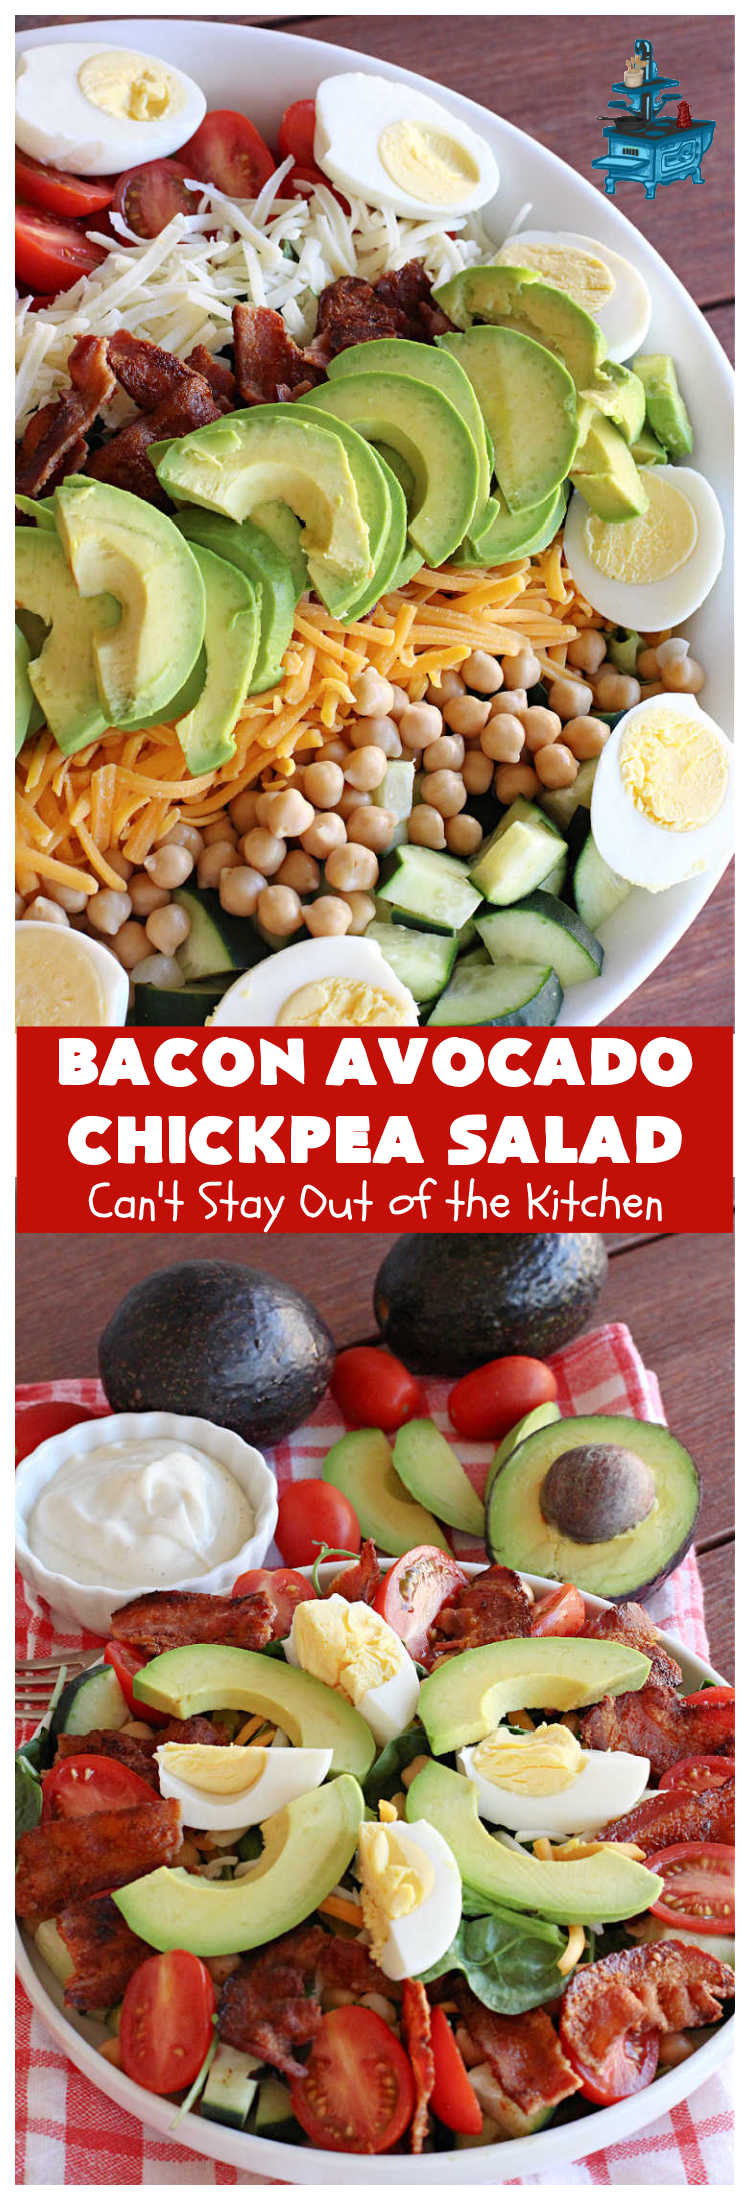 Bacon Avocado Chickpea Salad | Can't Stay Out of the Kitchen | this hearty #MainDish #salad is packed full of #protein including #bacon, #HardBoiledEggs, #chickpeas & two kinds of #cheese including #MontereyJack & #CheddarCheese. It's a great entree for hot summer nights when you don't want to heat up the kitchen. Great #TossedSalad for company or #holiday dinners too. #pork #avocados #tomatoes #GlutenFree #BaconAvocadoChickpeaSalad